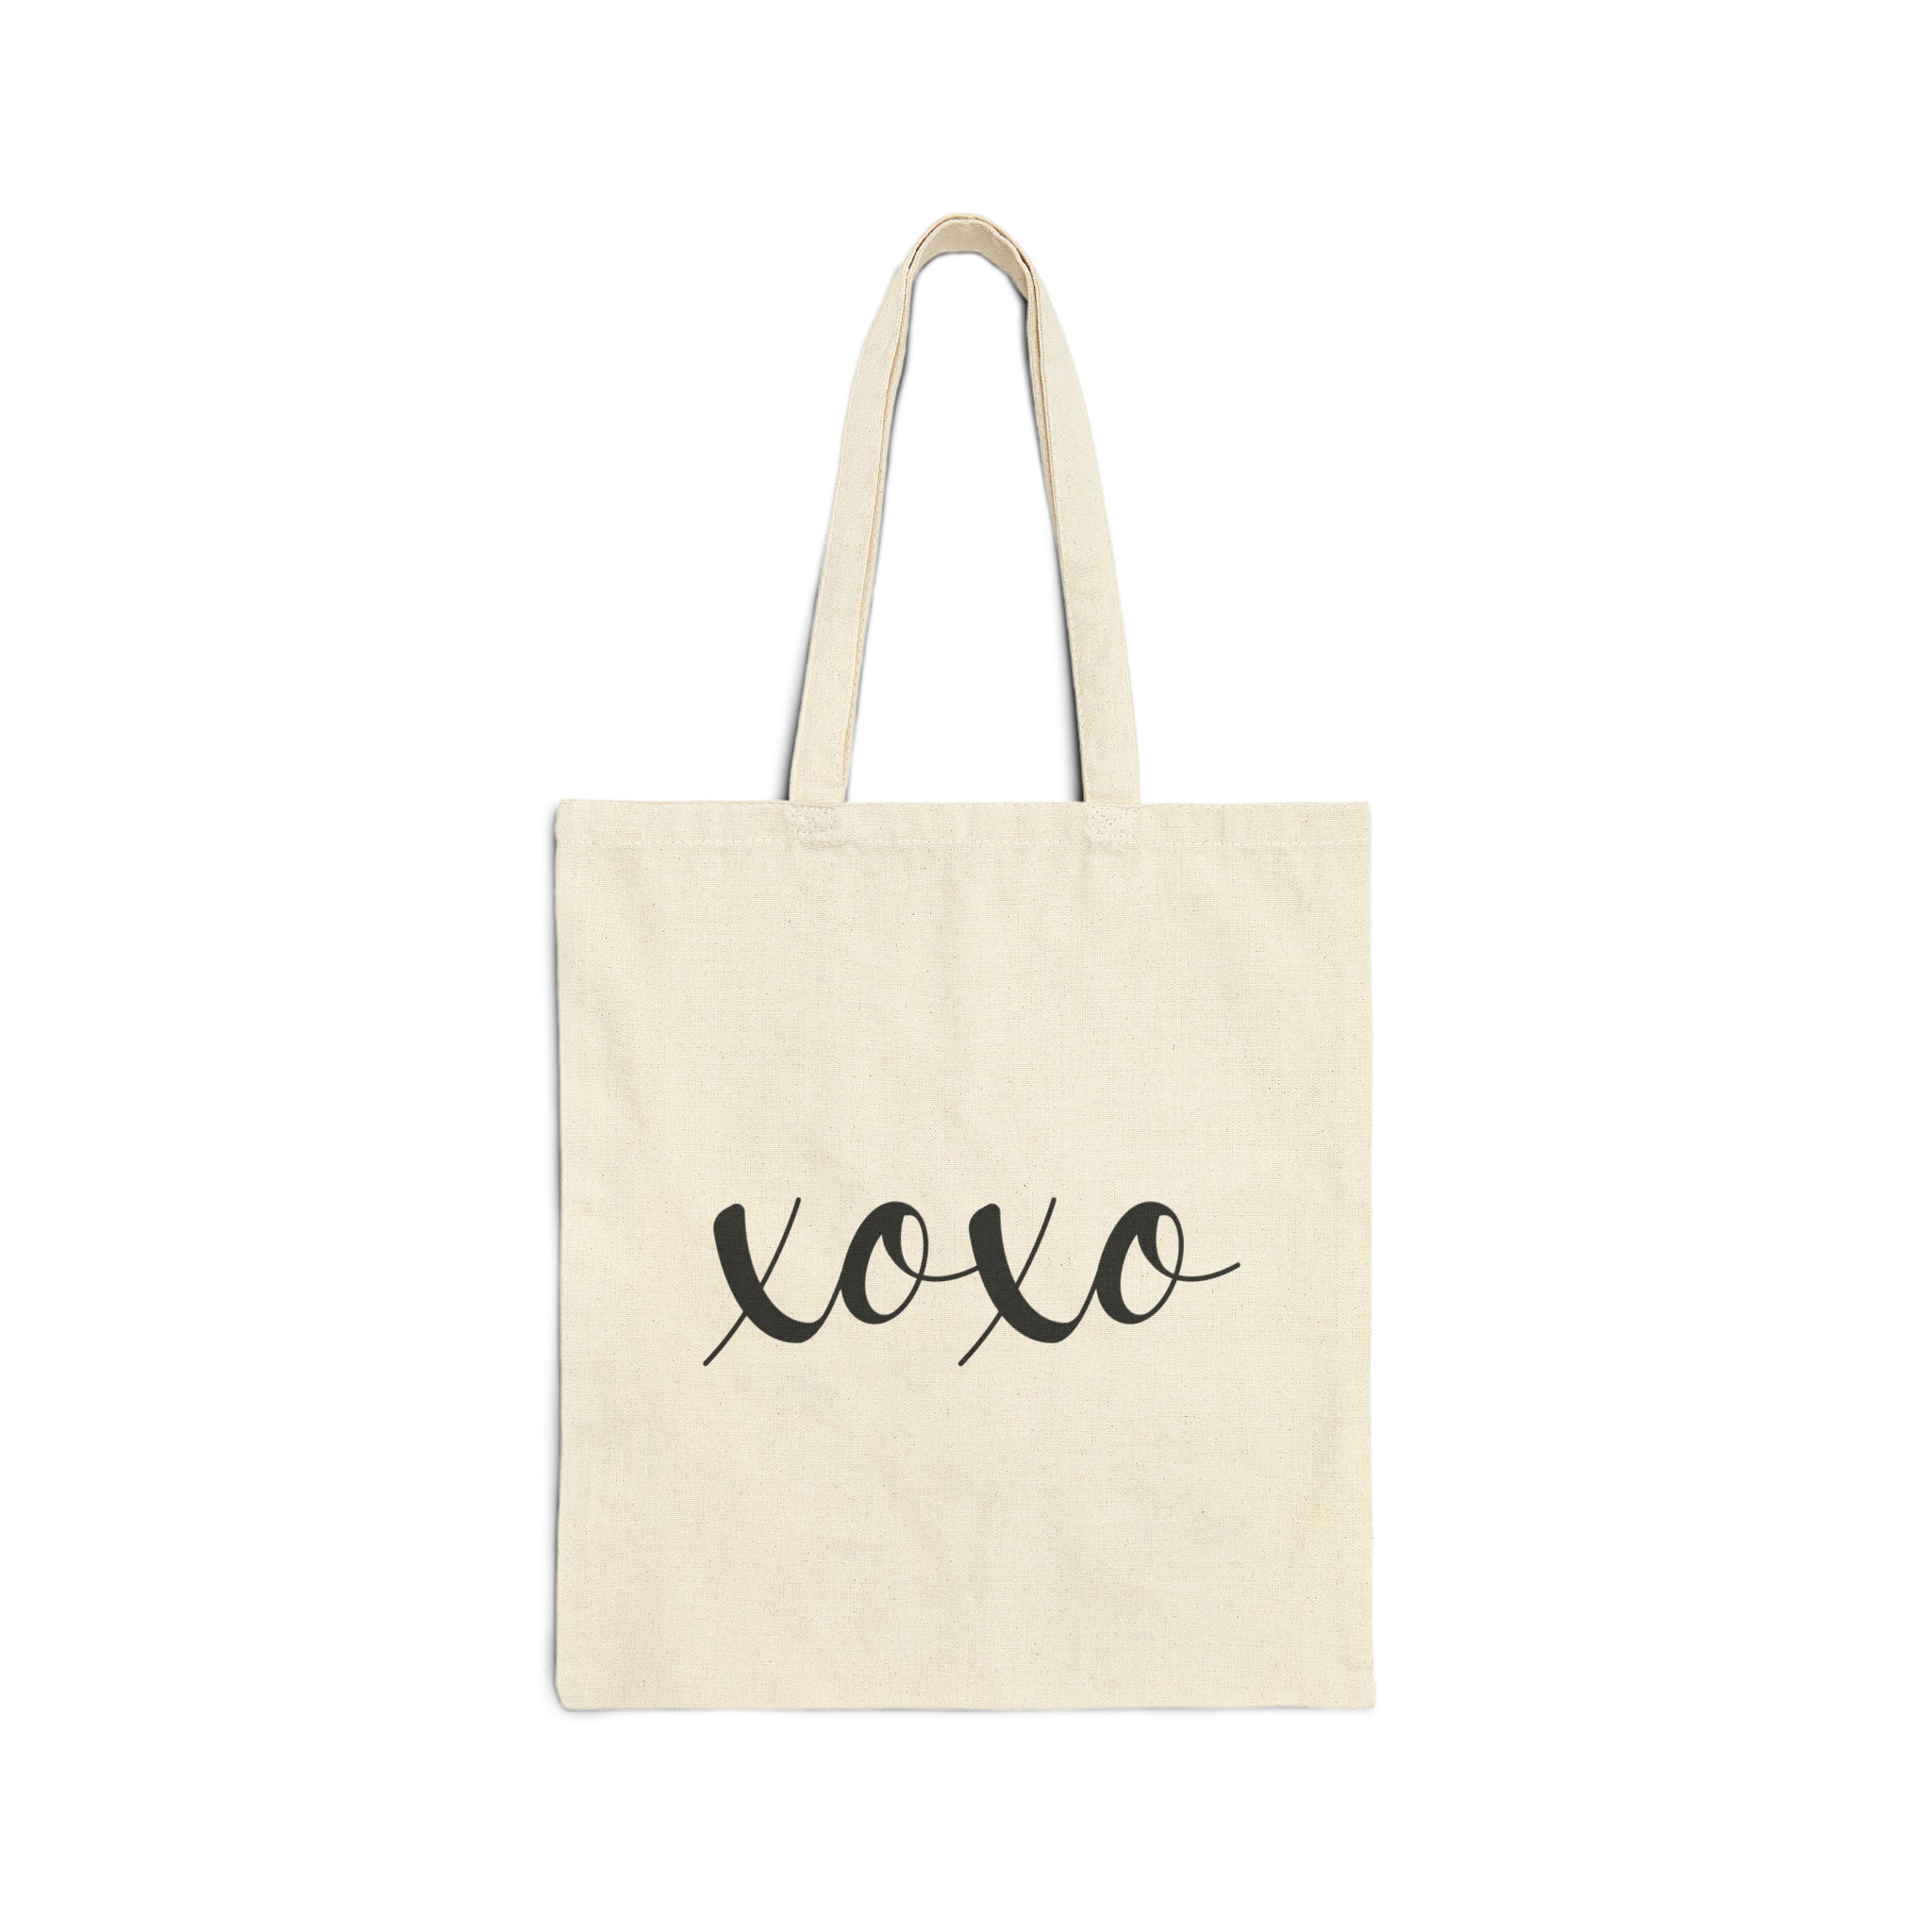 XOXO Tote Bag, Fall, Thanksgiving, Gift Under 15, Minimalist, Cute Tote Bag, Gift For HeR